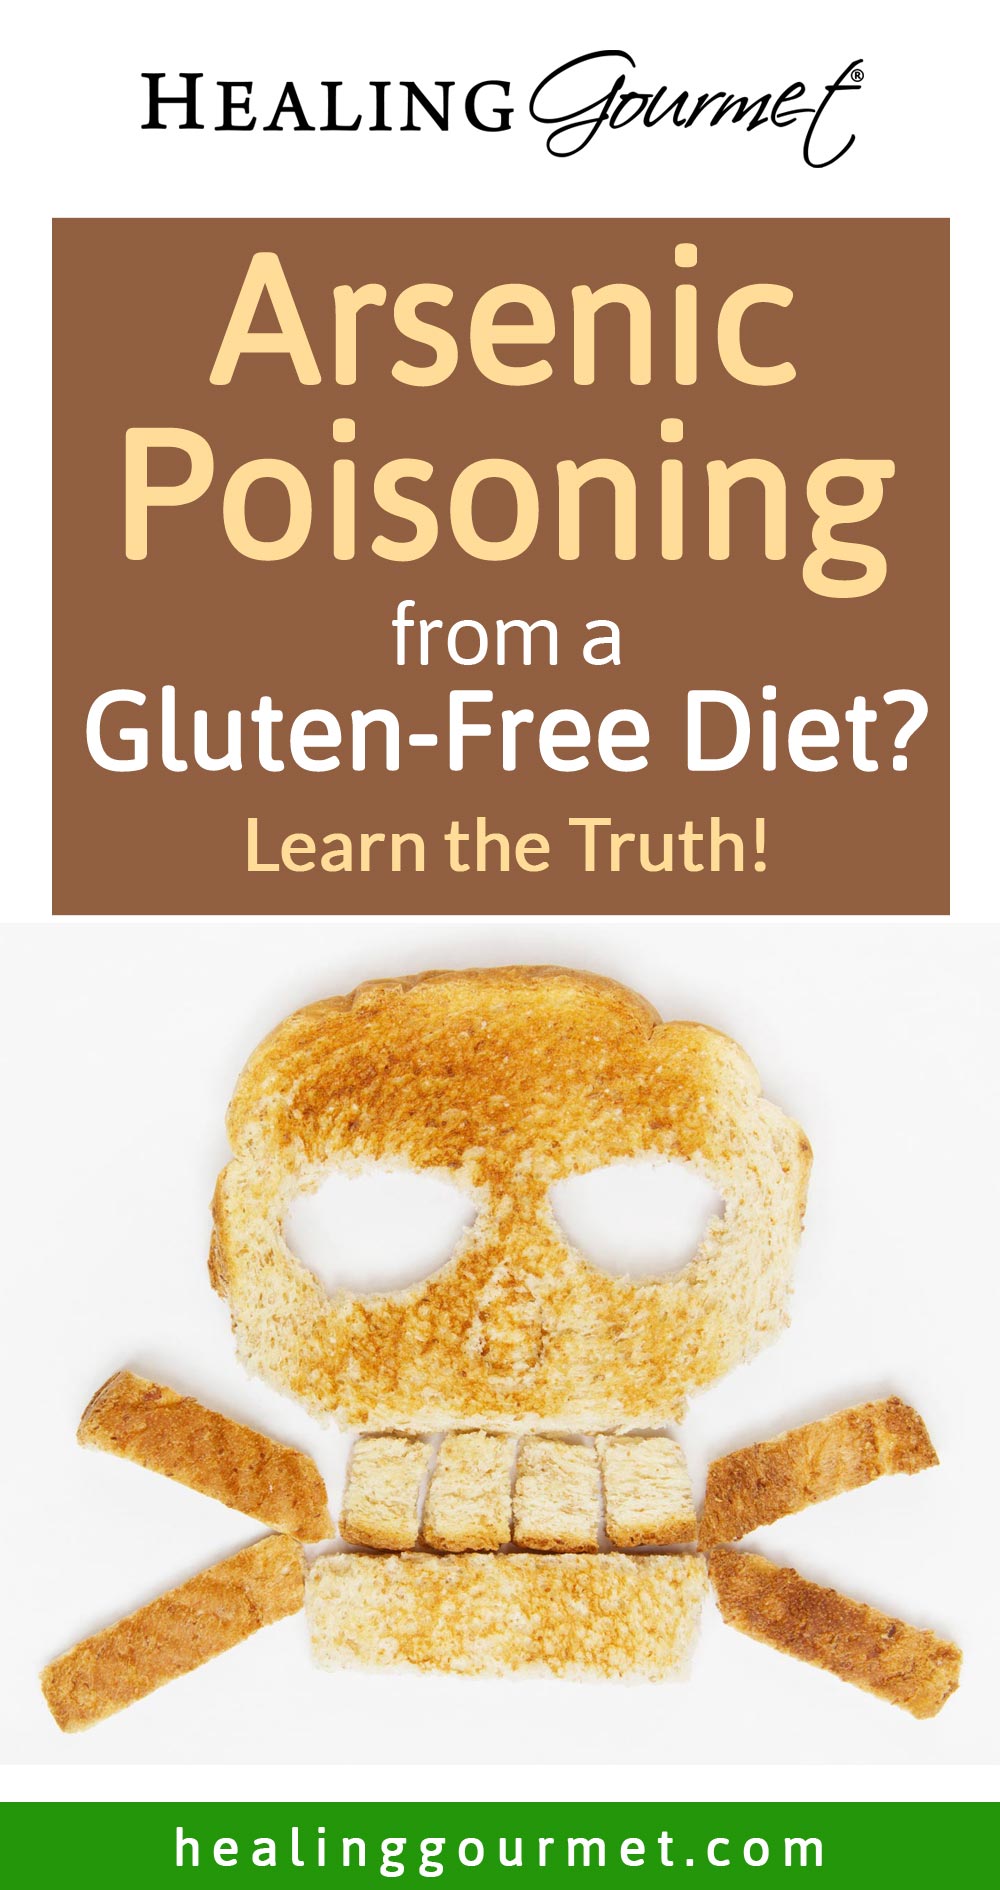 Can a Gluten-Free Diet Increase Your Risk of Arsenic Poisoning?